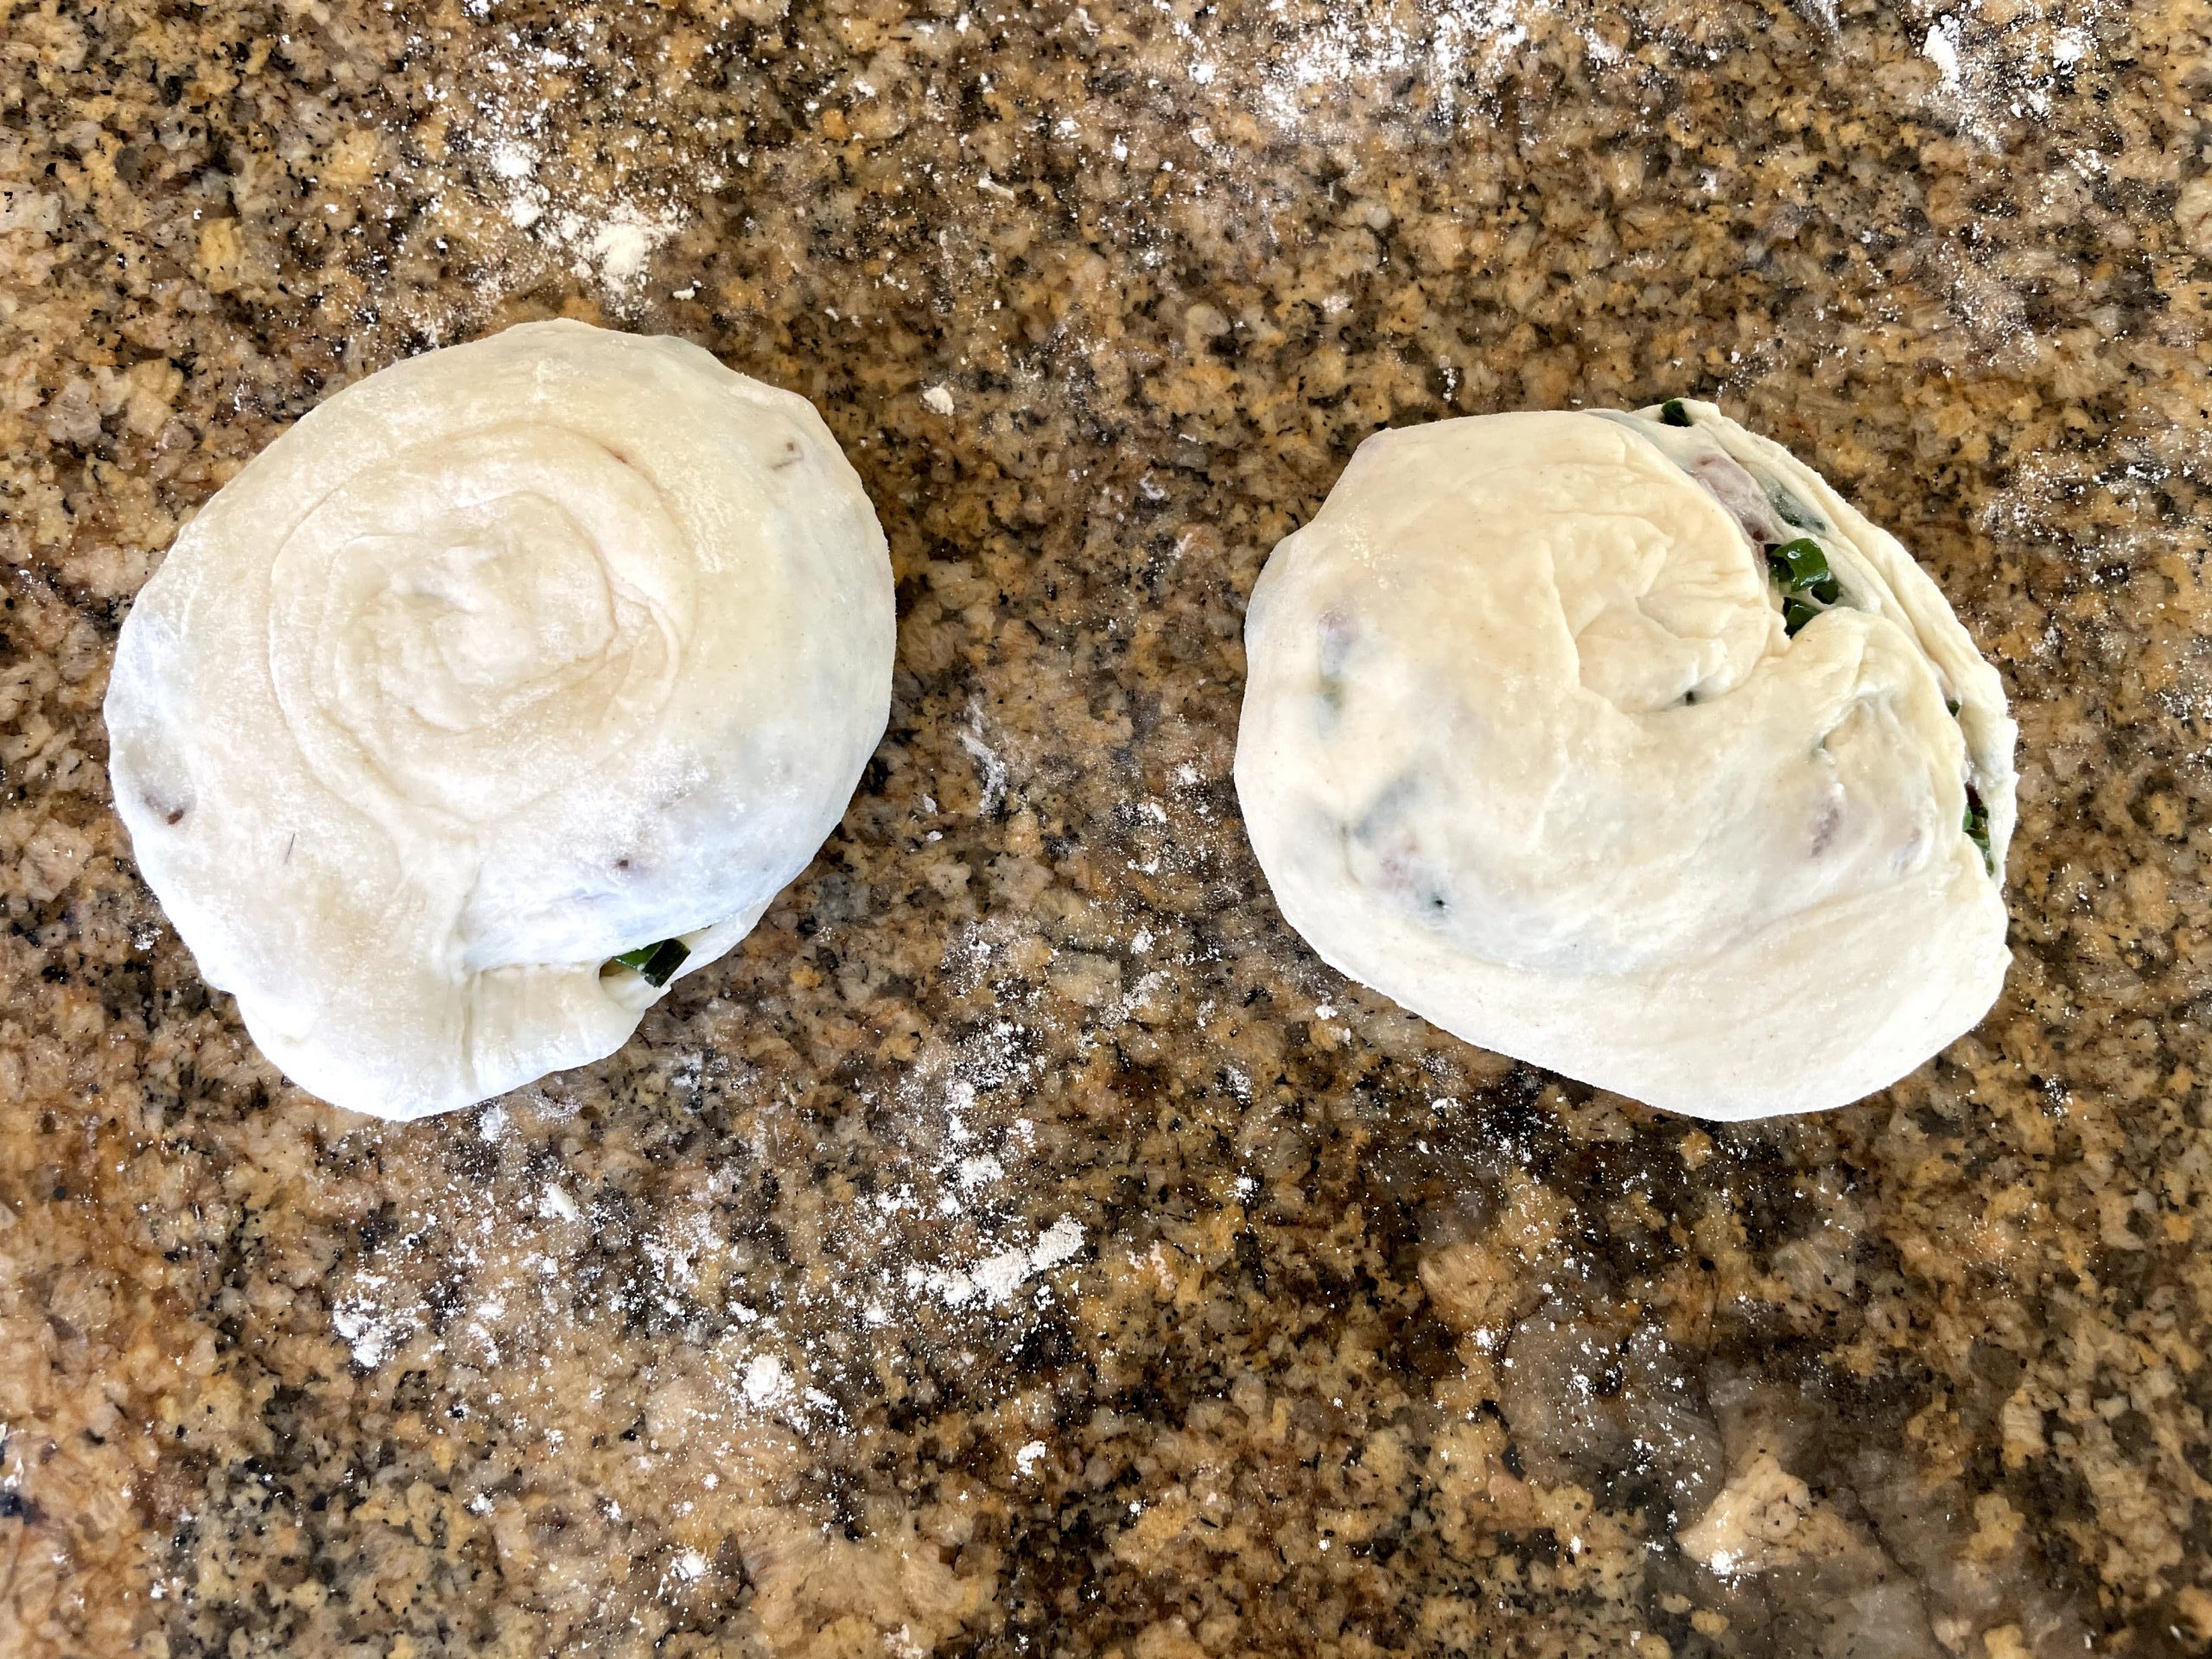 Using your palm, flatten the dough into discs.